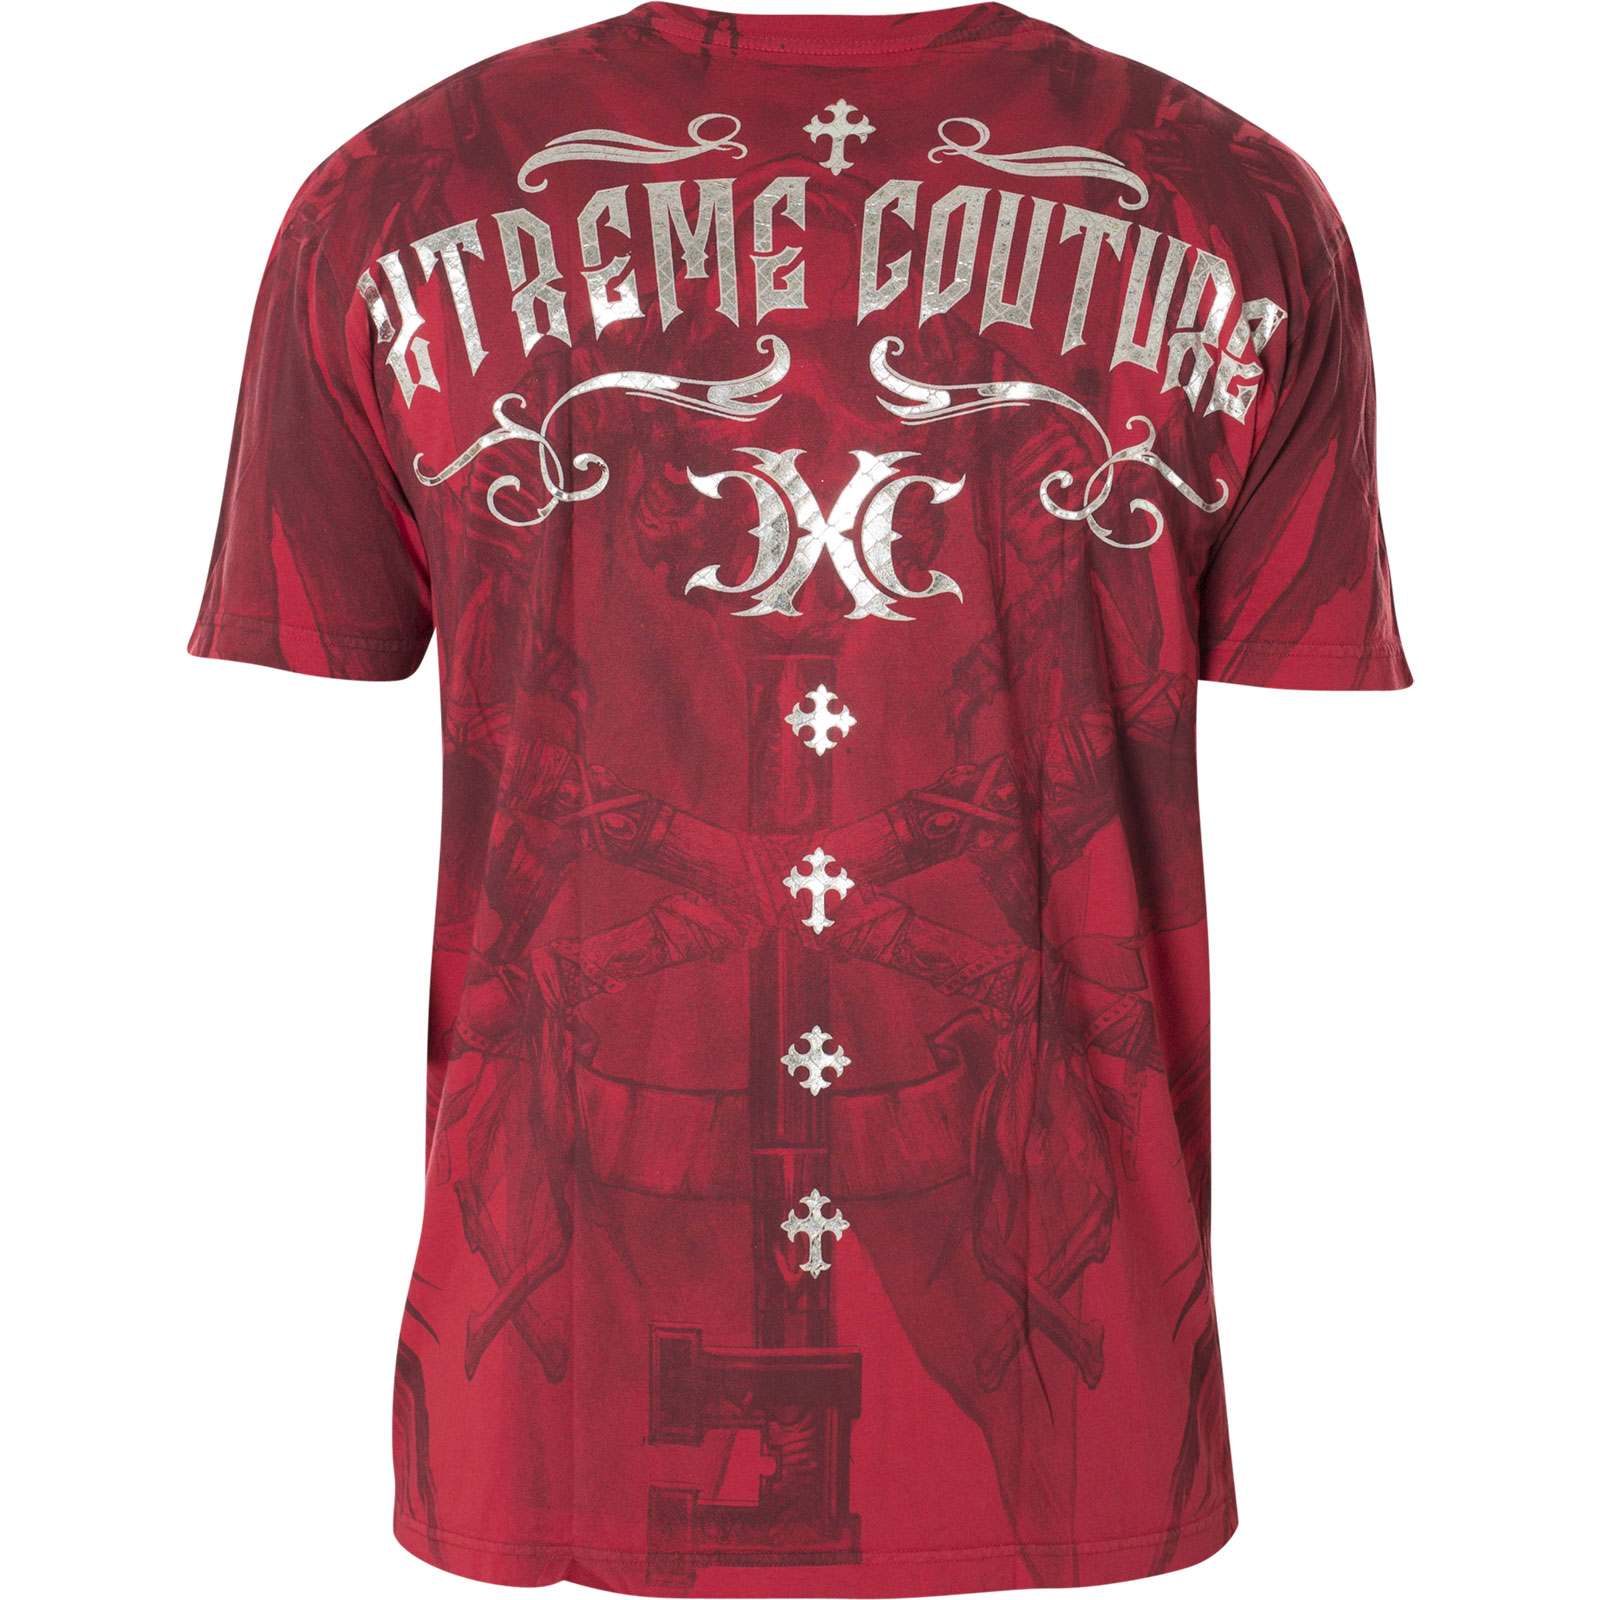 Xtreme Couture T- Shirt Eleventh Hour with a large cross